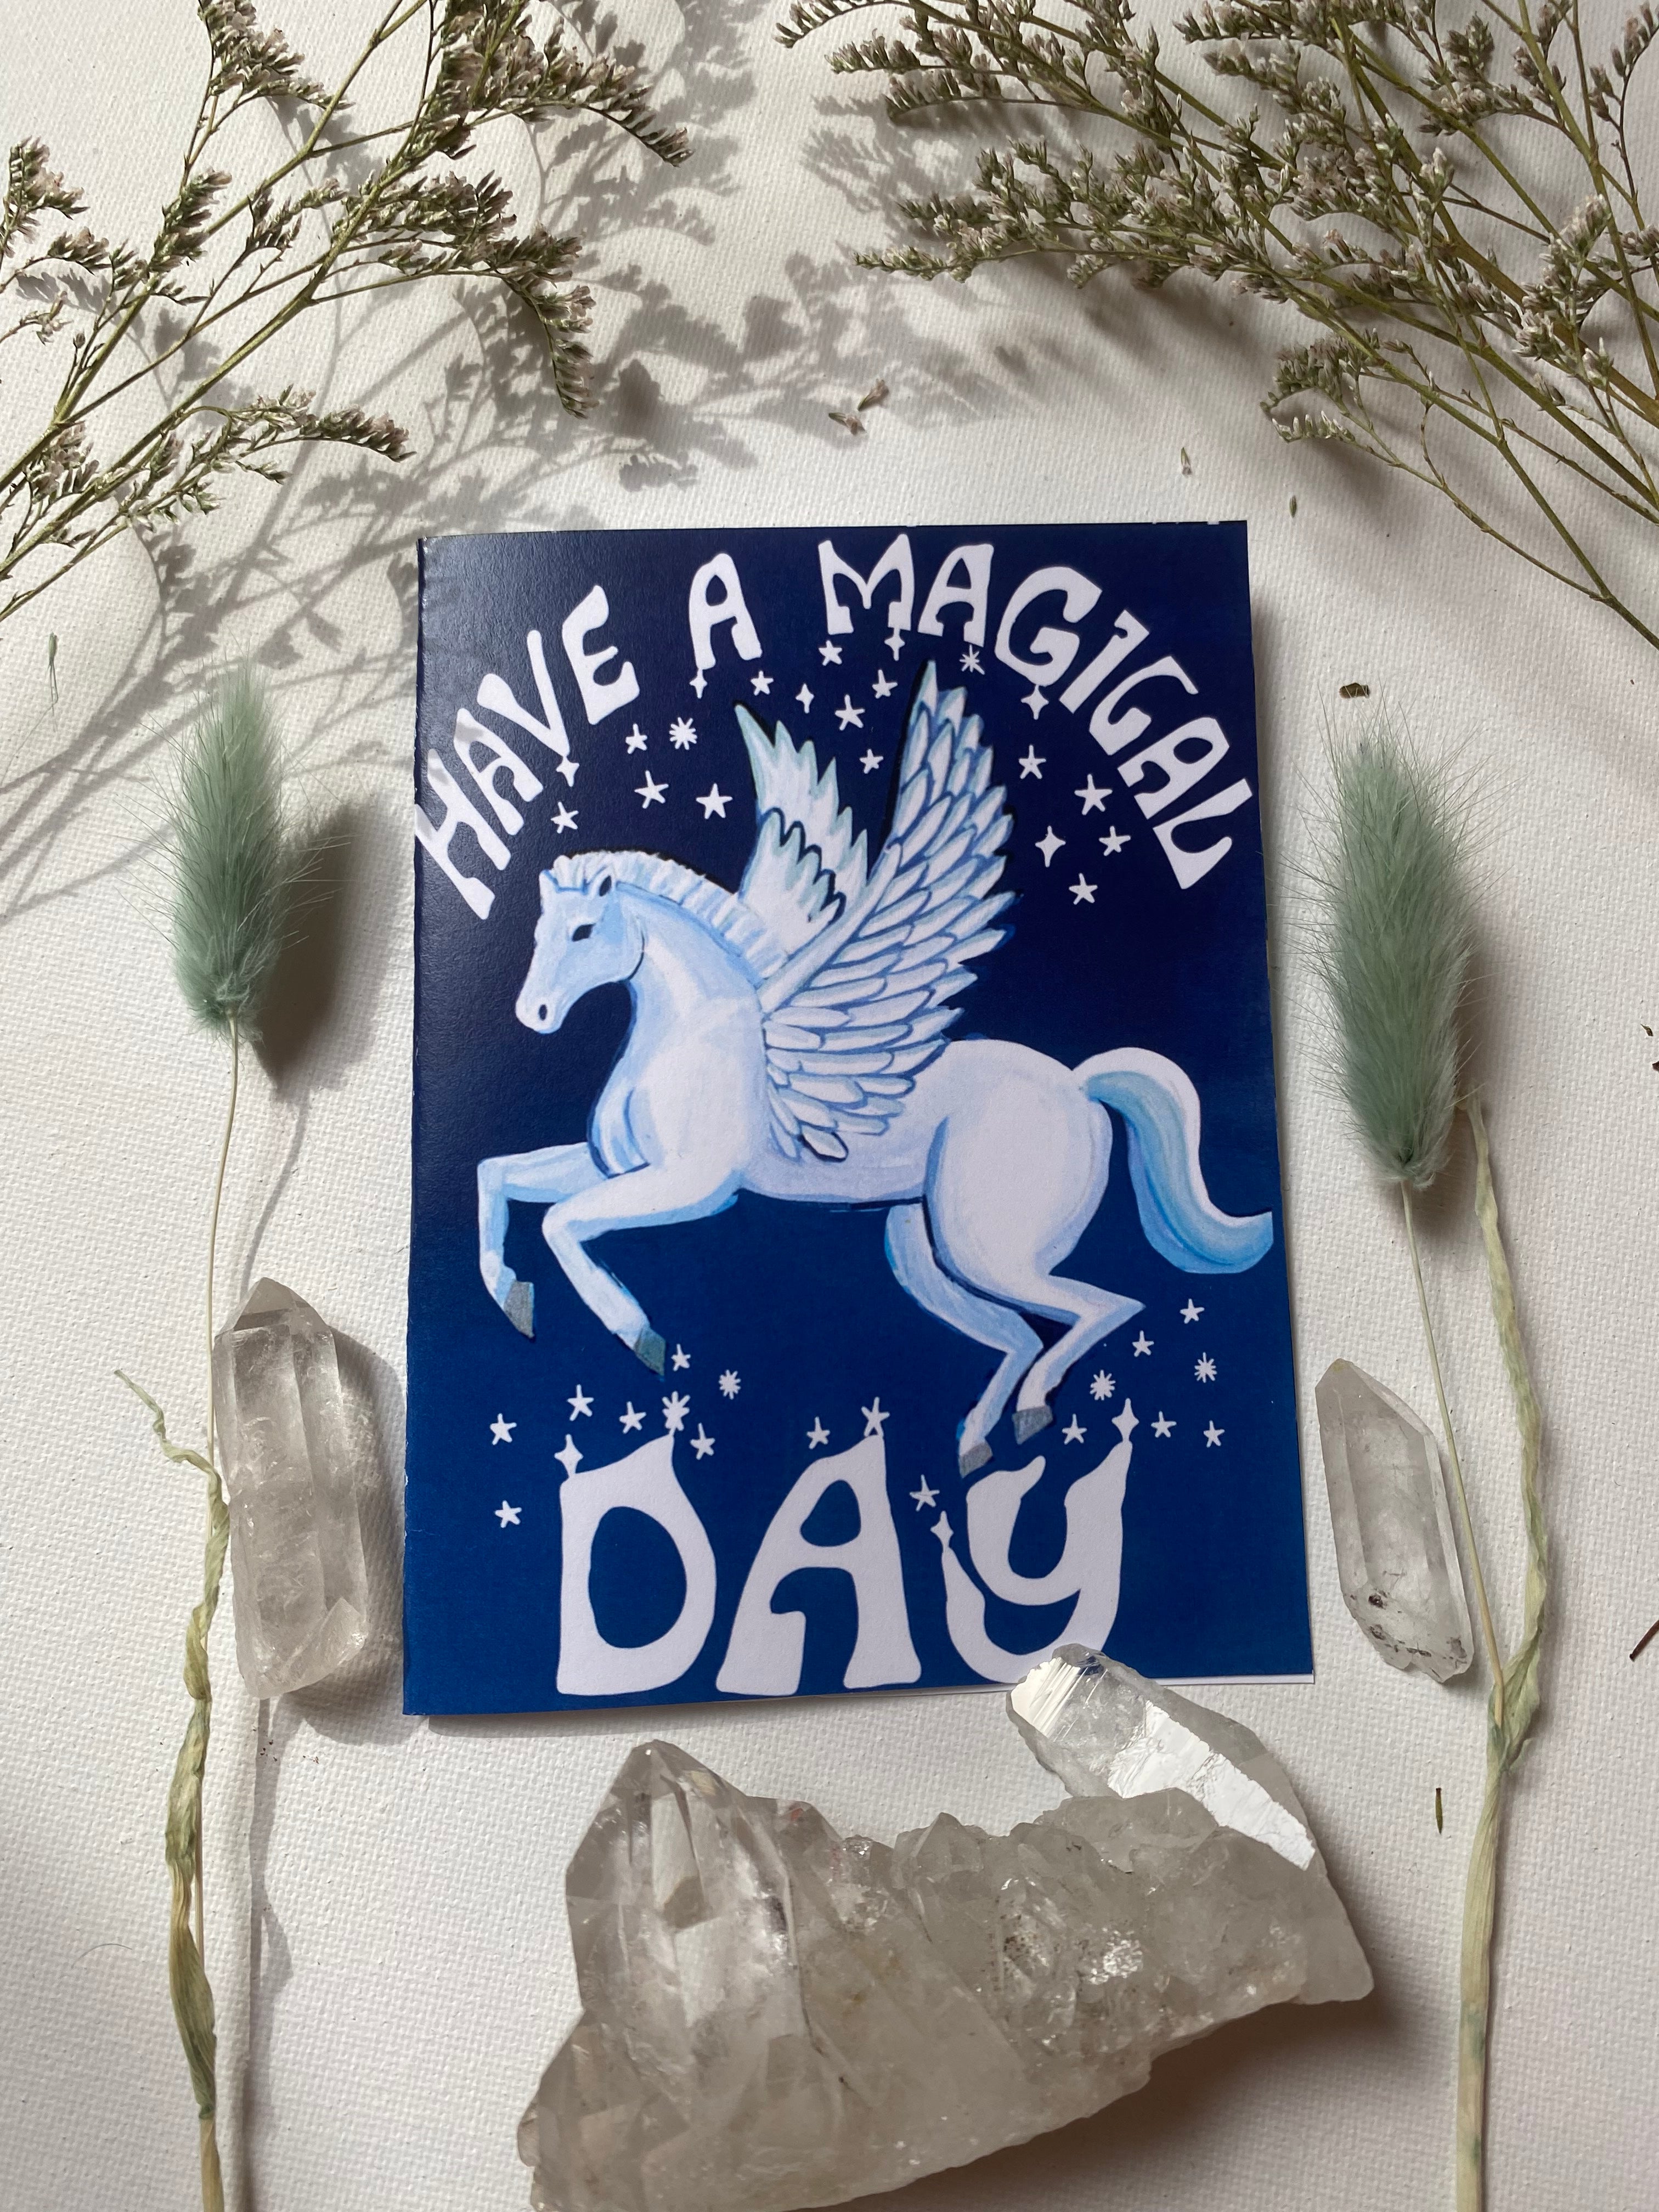 Have a Magical Day Card